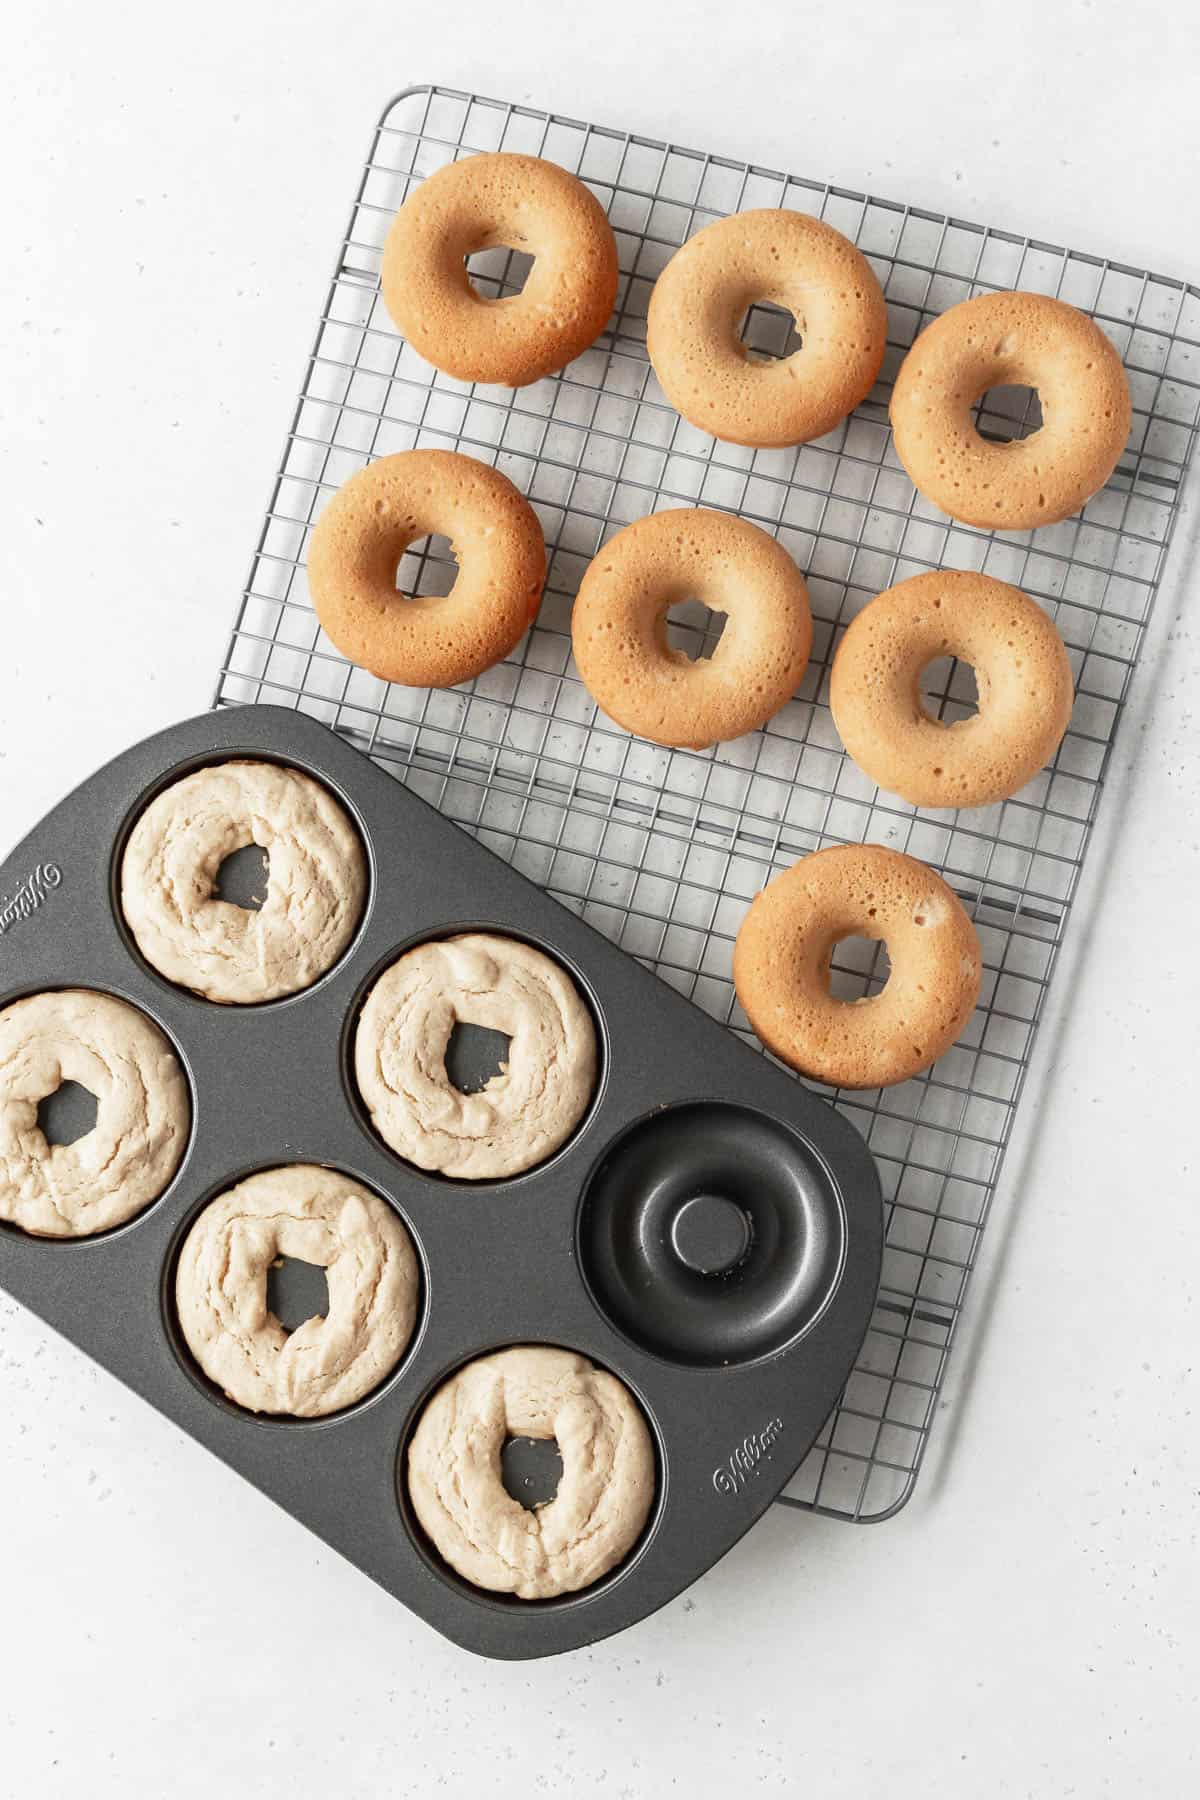 Overhead shot of a pan of gluten free dairy free doughnuts on a wire rack with more donuts that have been removed the pan are cooling.